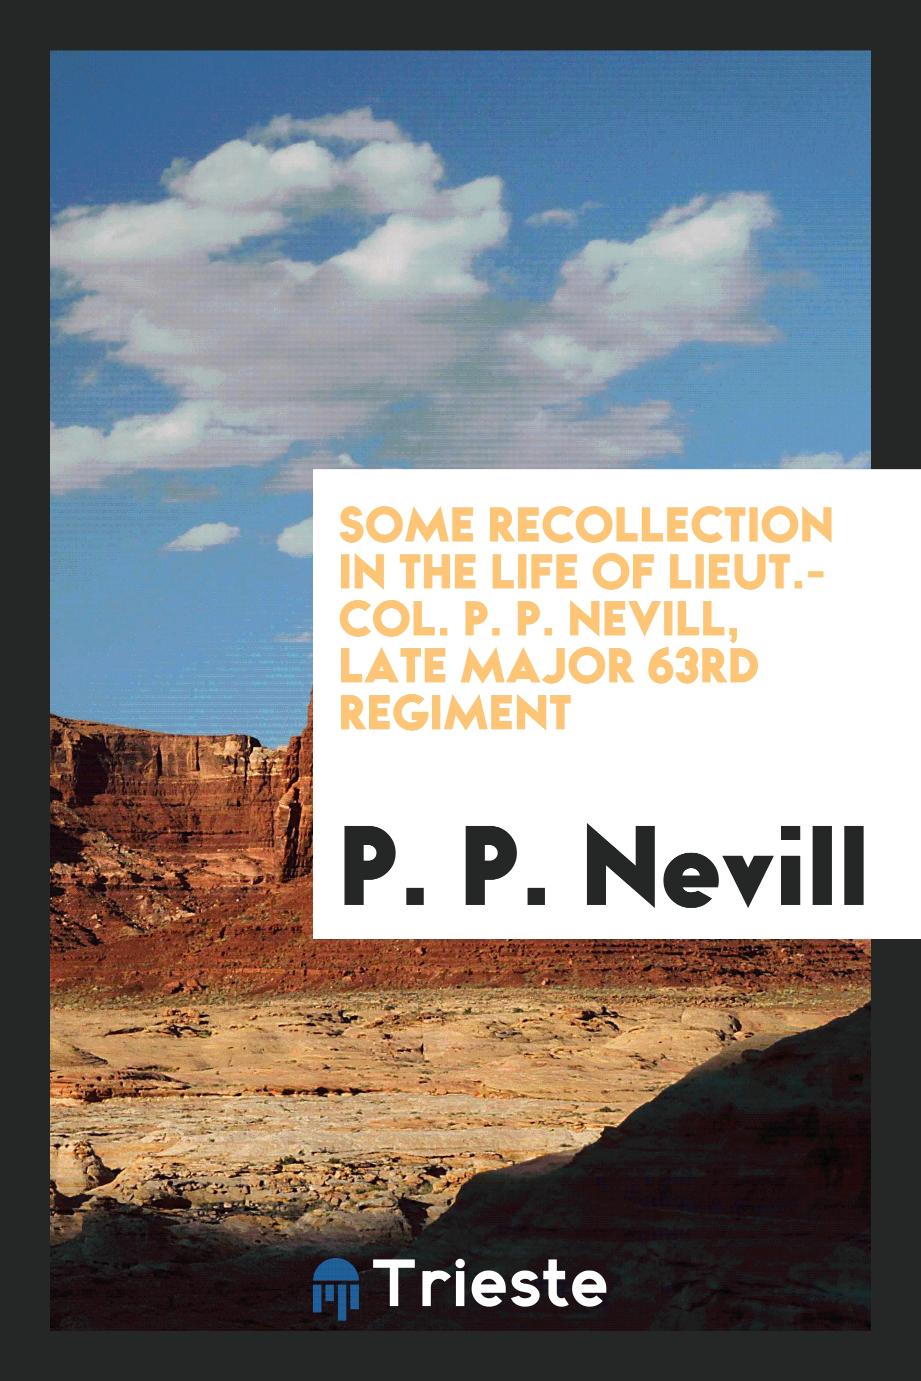 Some recollection in the life of Lieut.-Col. P. P. Nevill, late major 63rd regiment